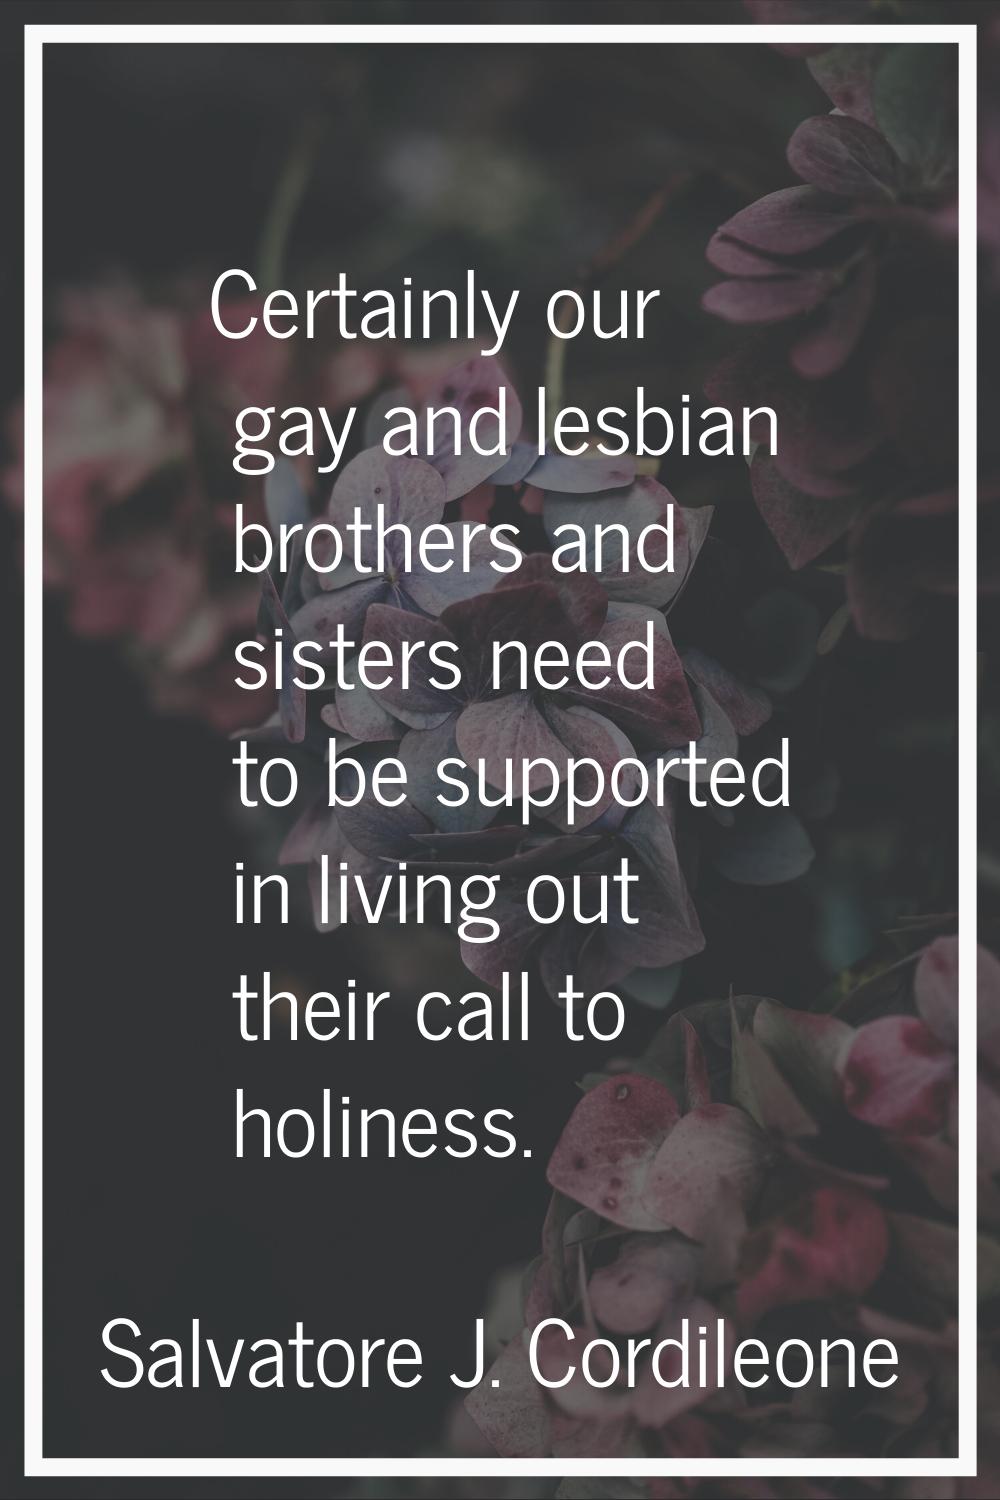 Certainly our gay and lesbian brothers and sisters need to be supported in living out their call to